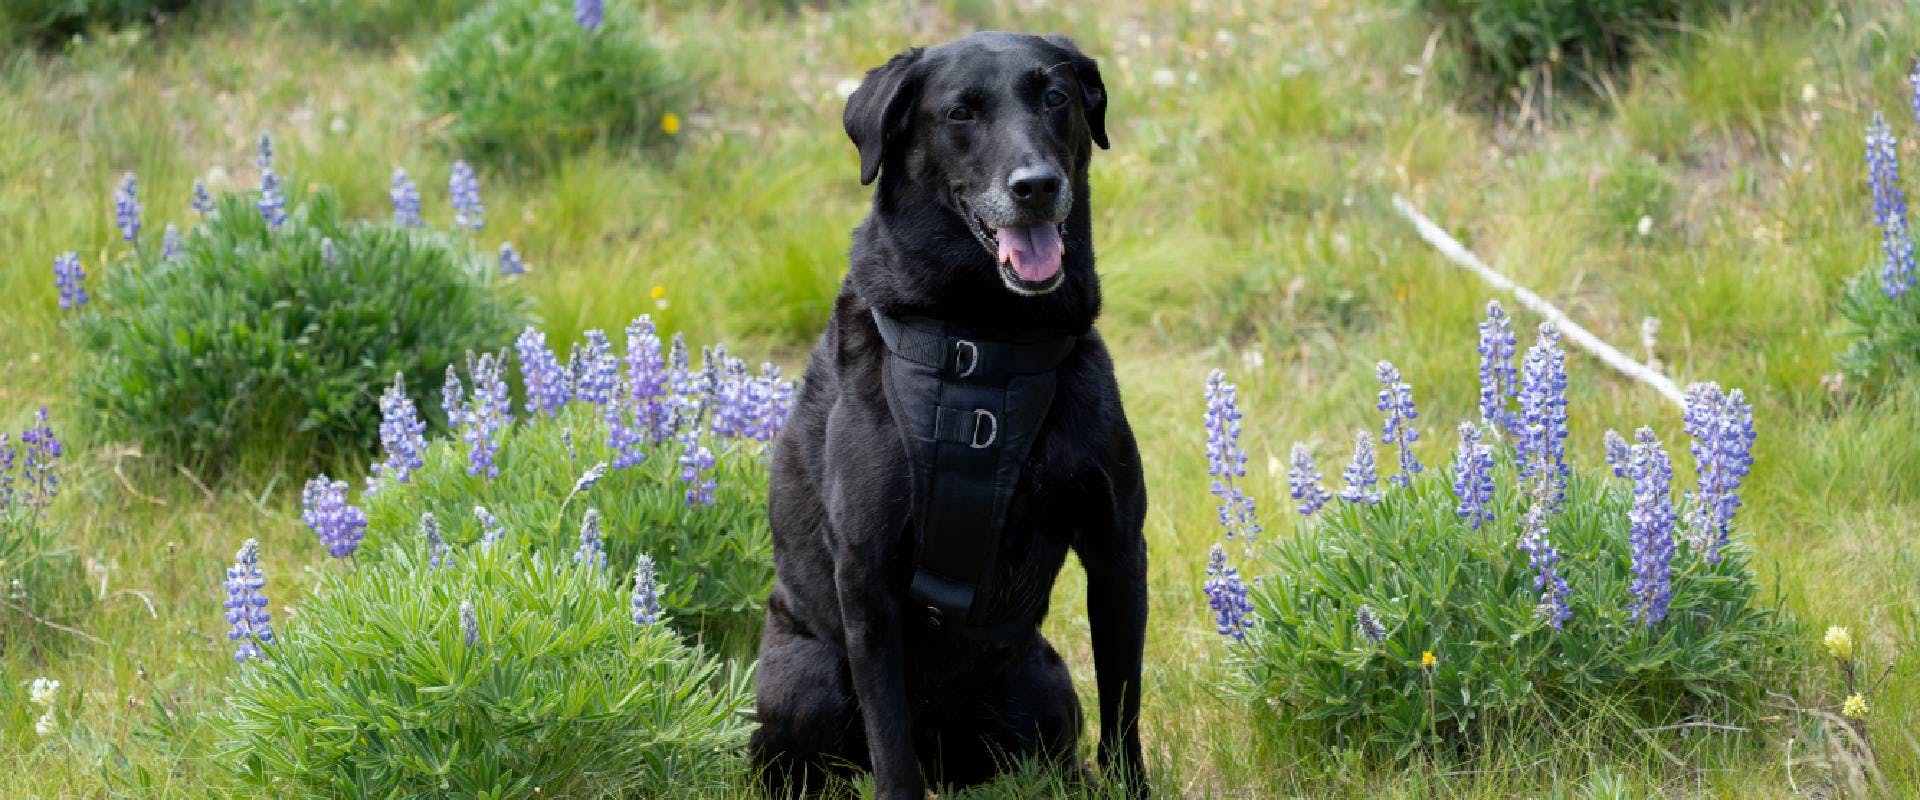 Black Labrador dog sitting in a field of lupine plants